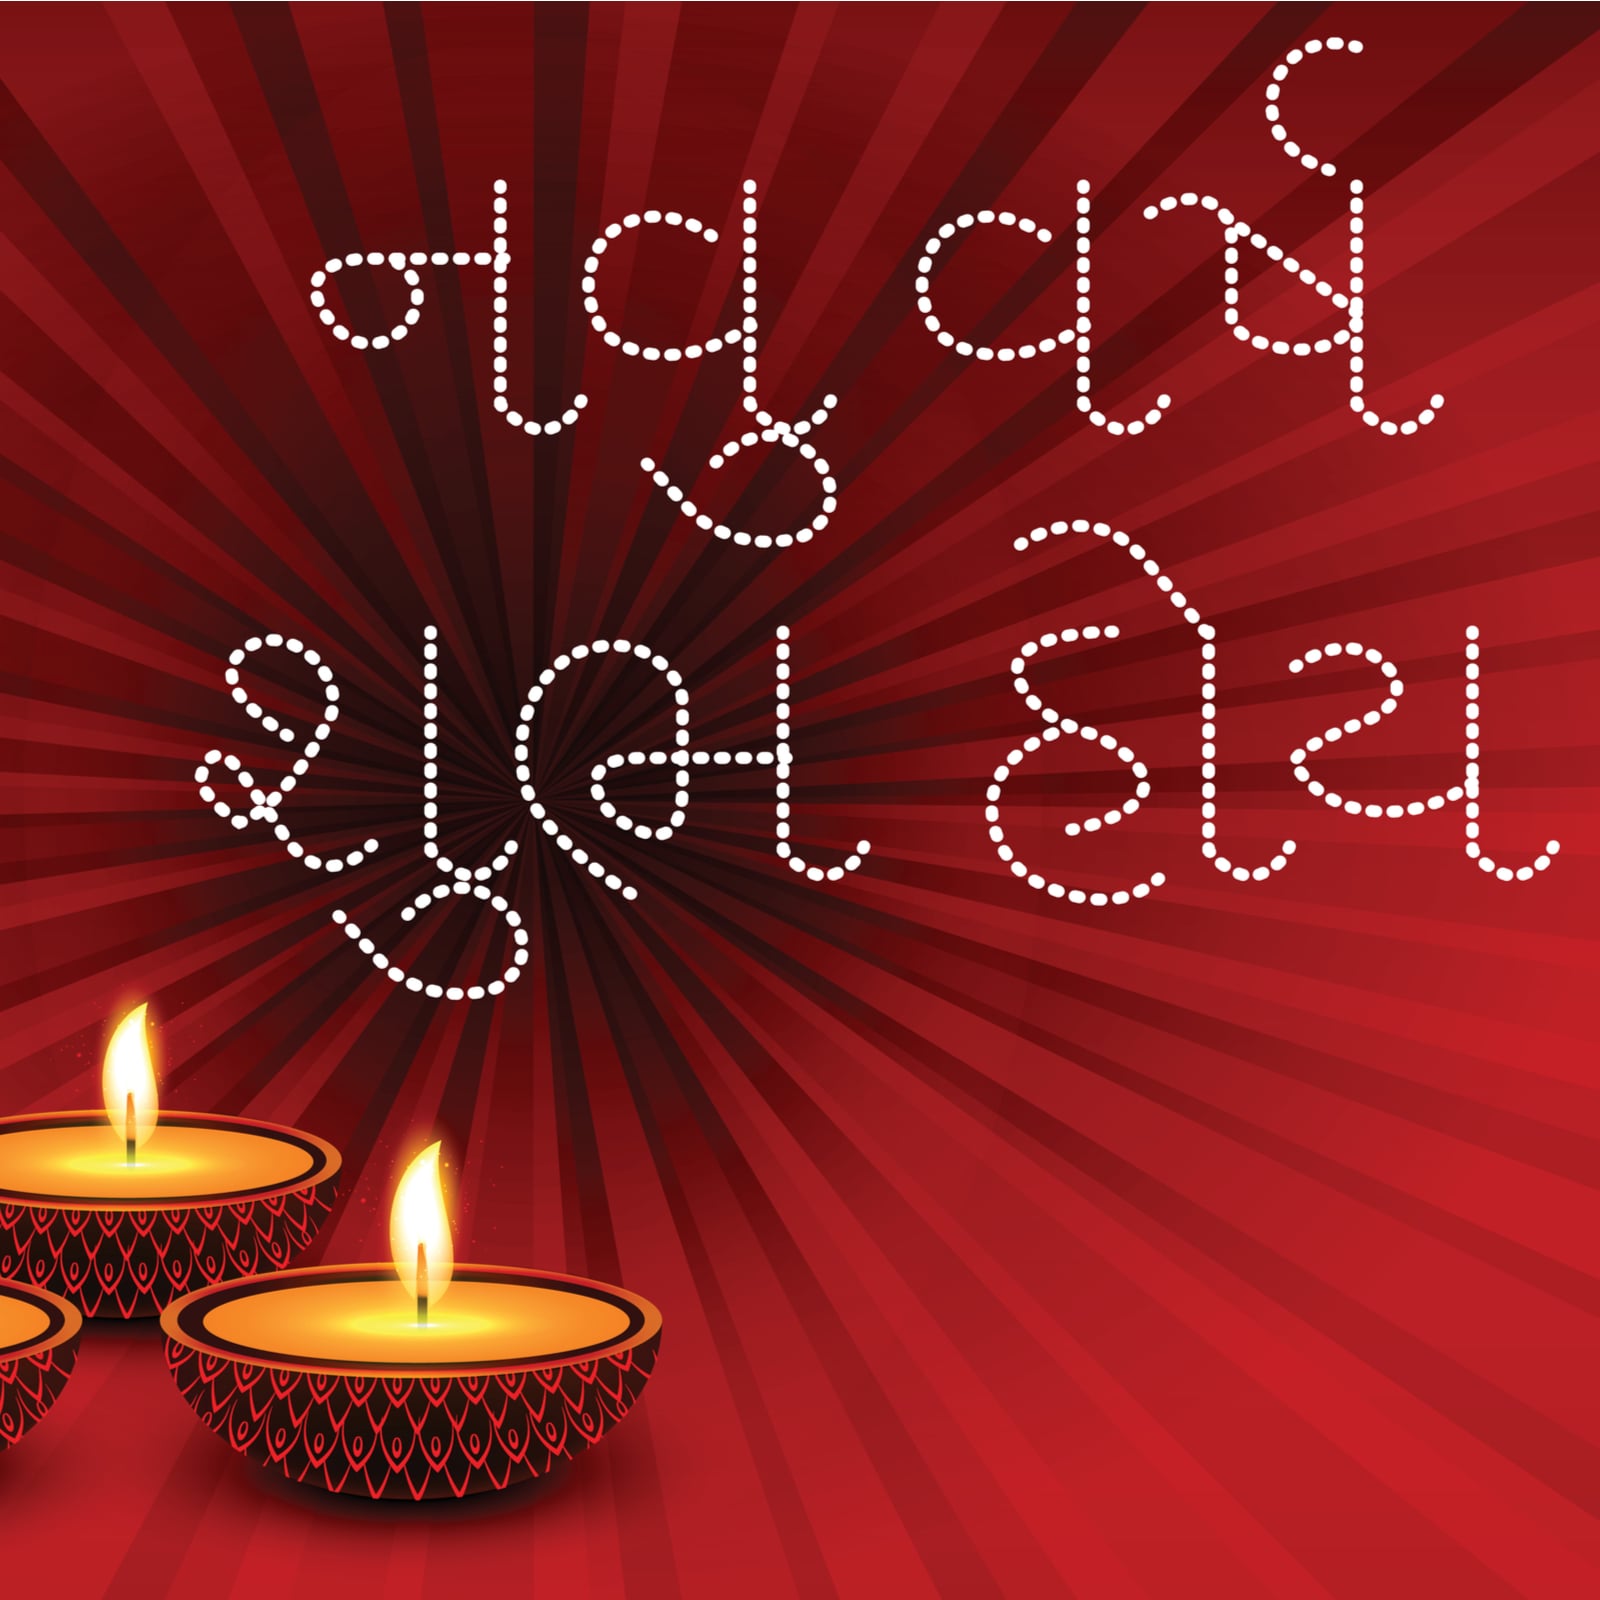 Happy Gujarati New Year 2021: Wishes Images, Quotes, Photos, Pics, Facebook SMS and Messages. (Image: Shutterstock)